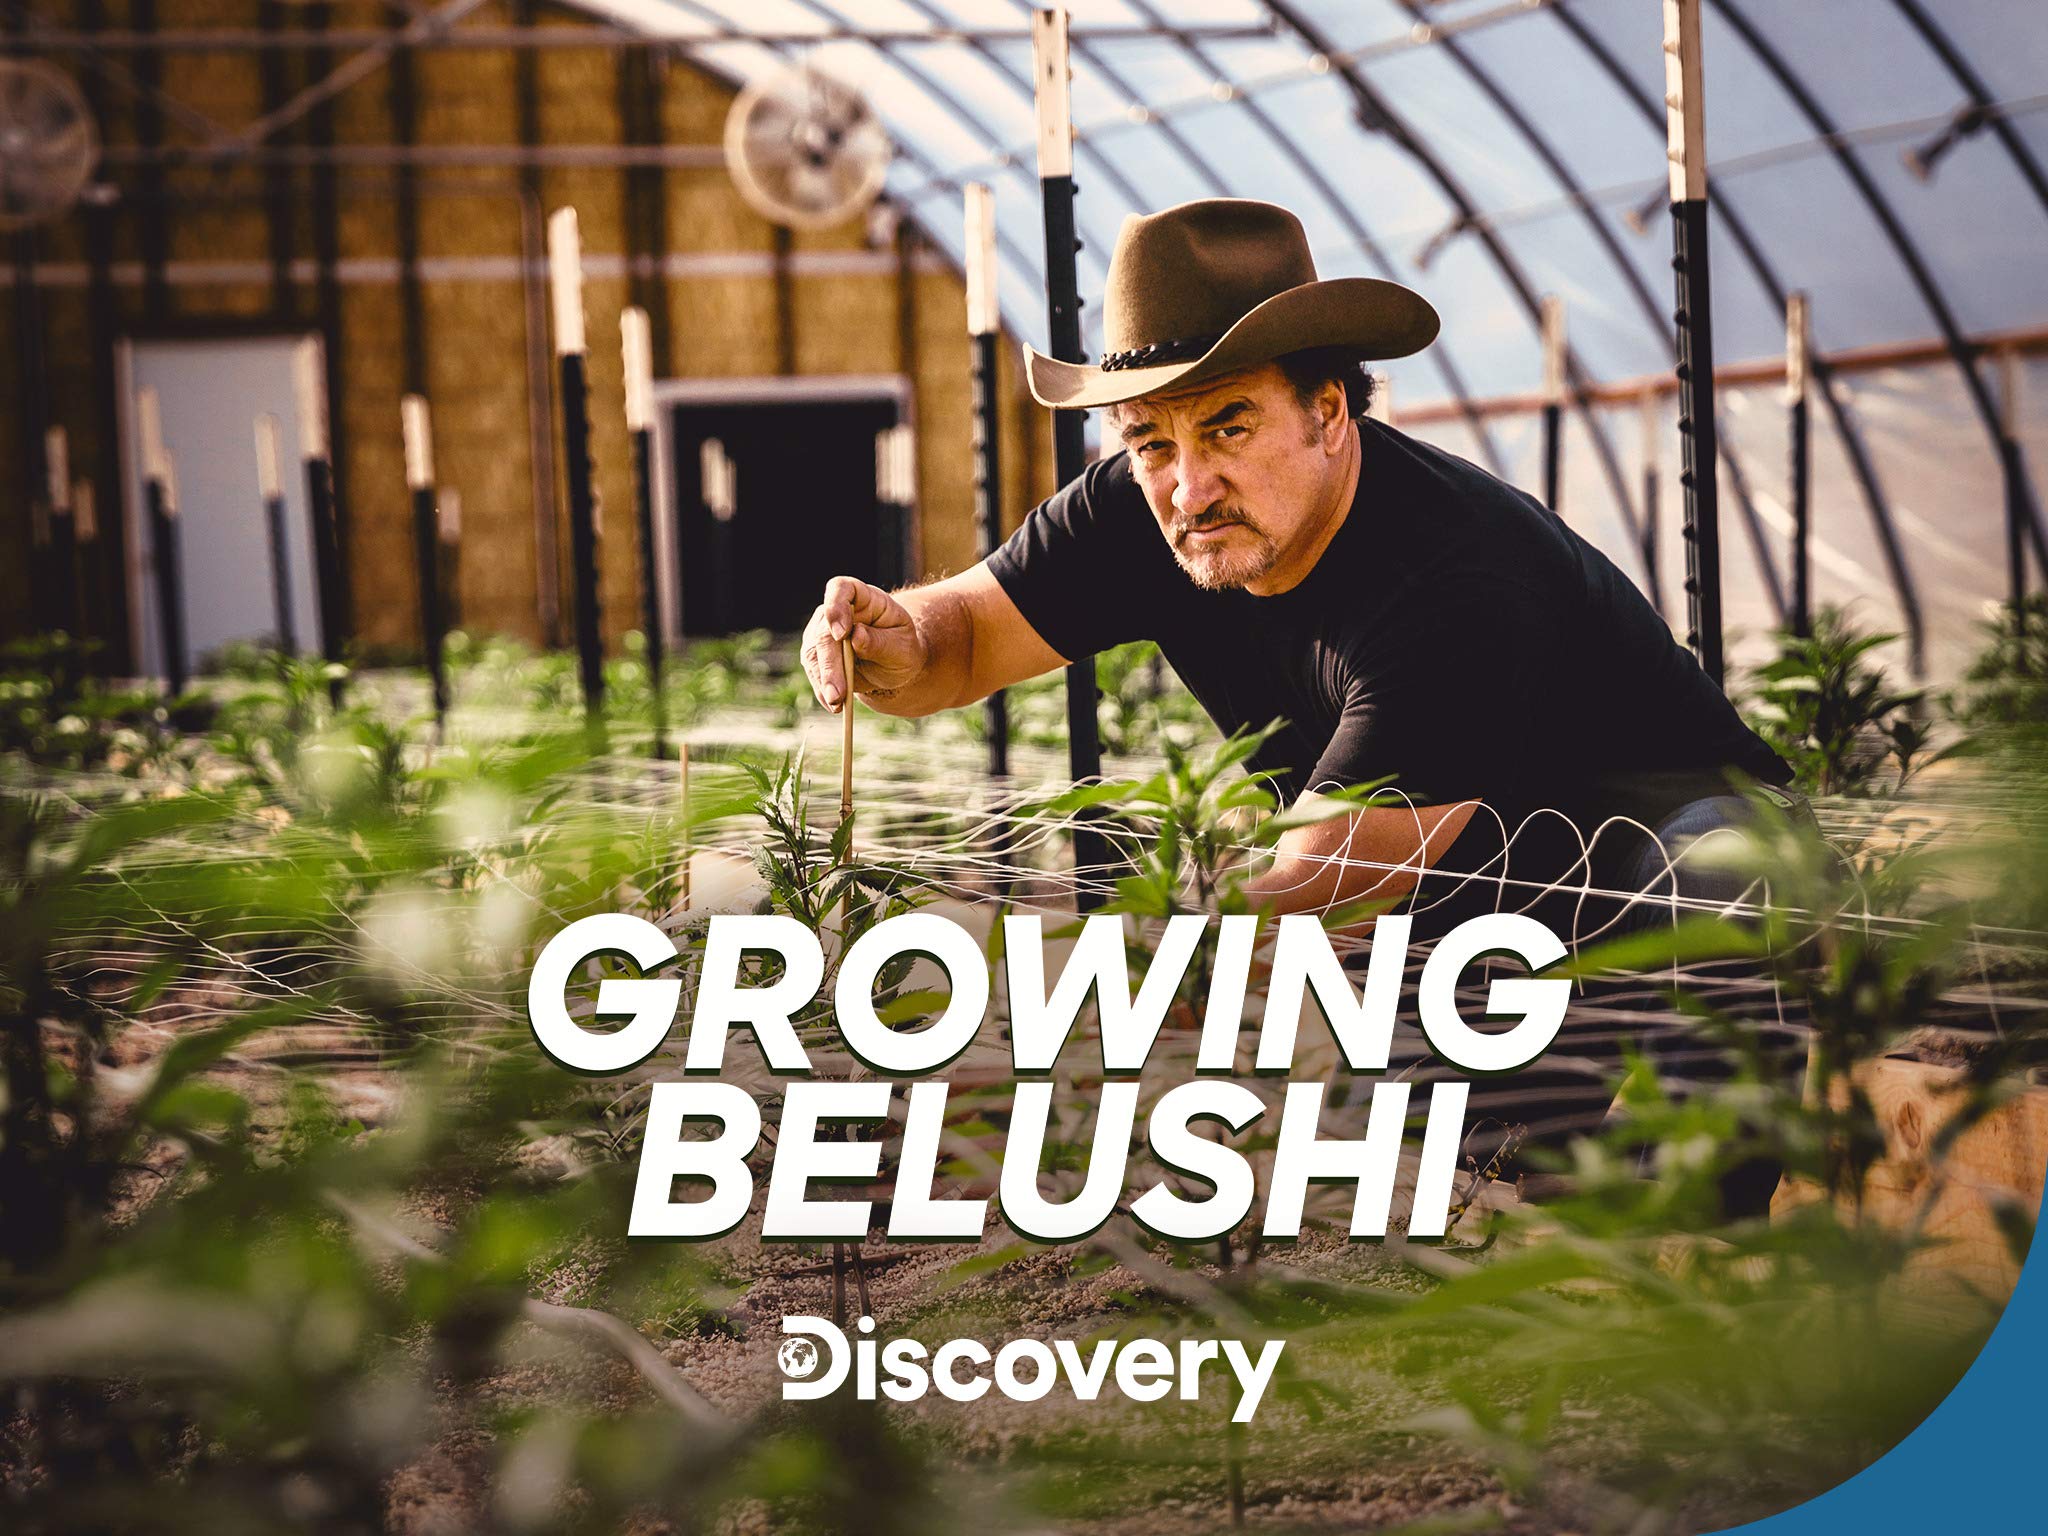 All-New Season of "Growing Belushi" Premieres on Discovery Channel Wednesday, April 5 at 9PM ET/PT